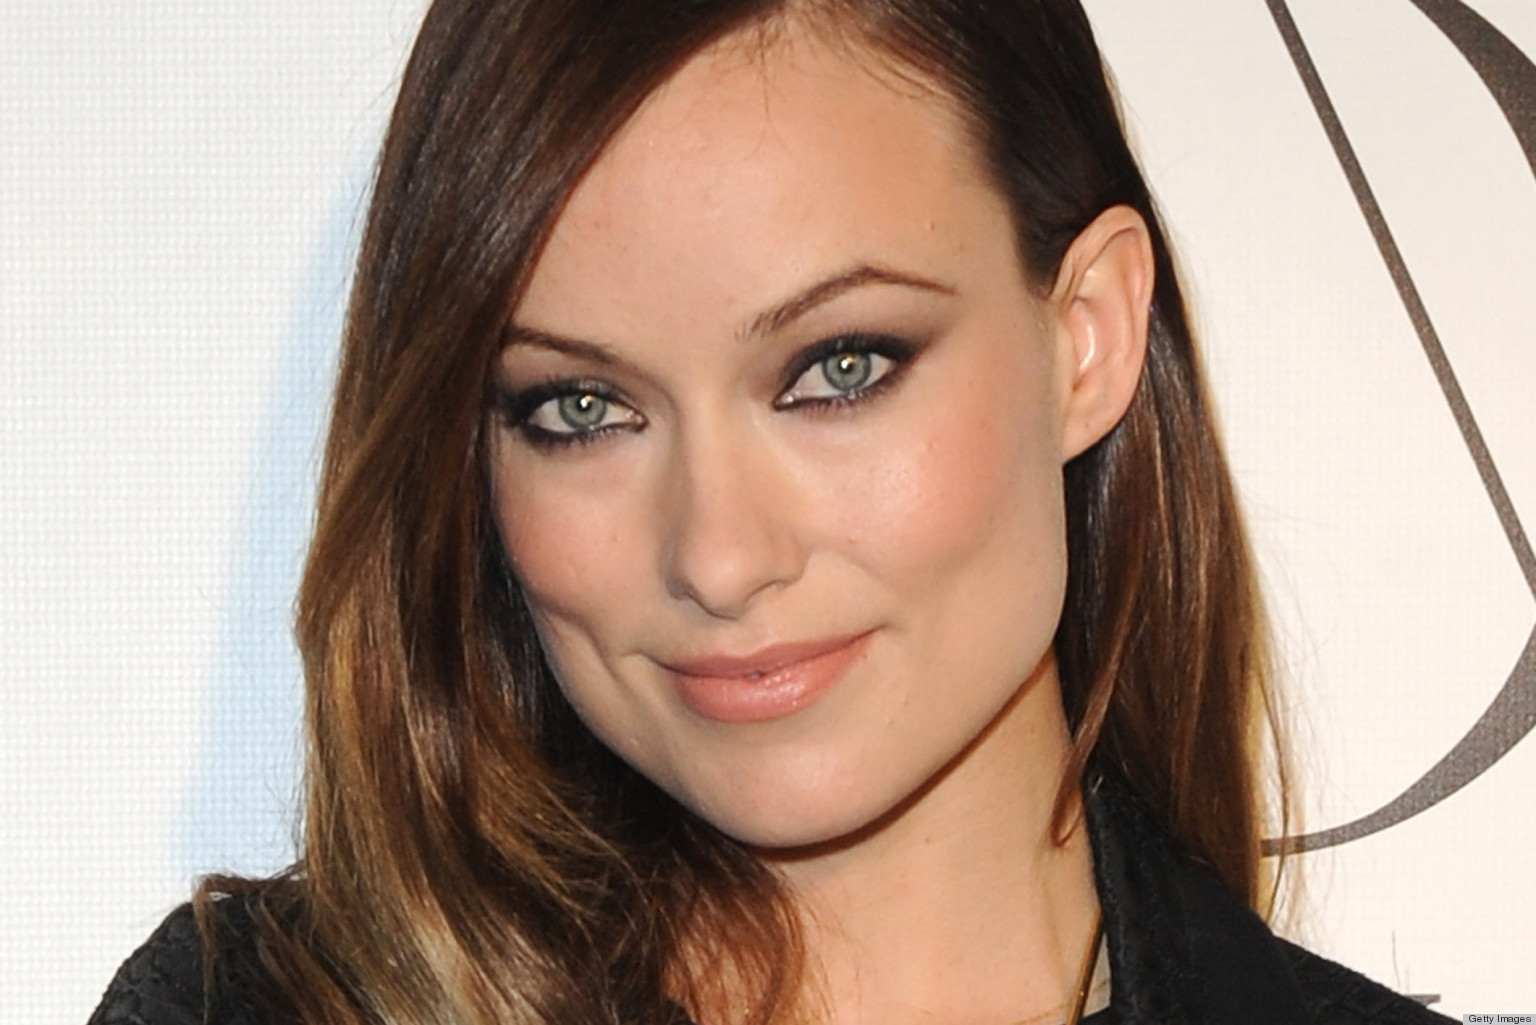 17 Best images about Olivia Wilde - gorgeous on Pinterest | Olivia